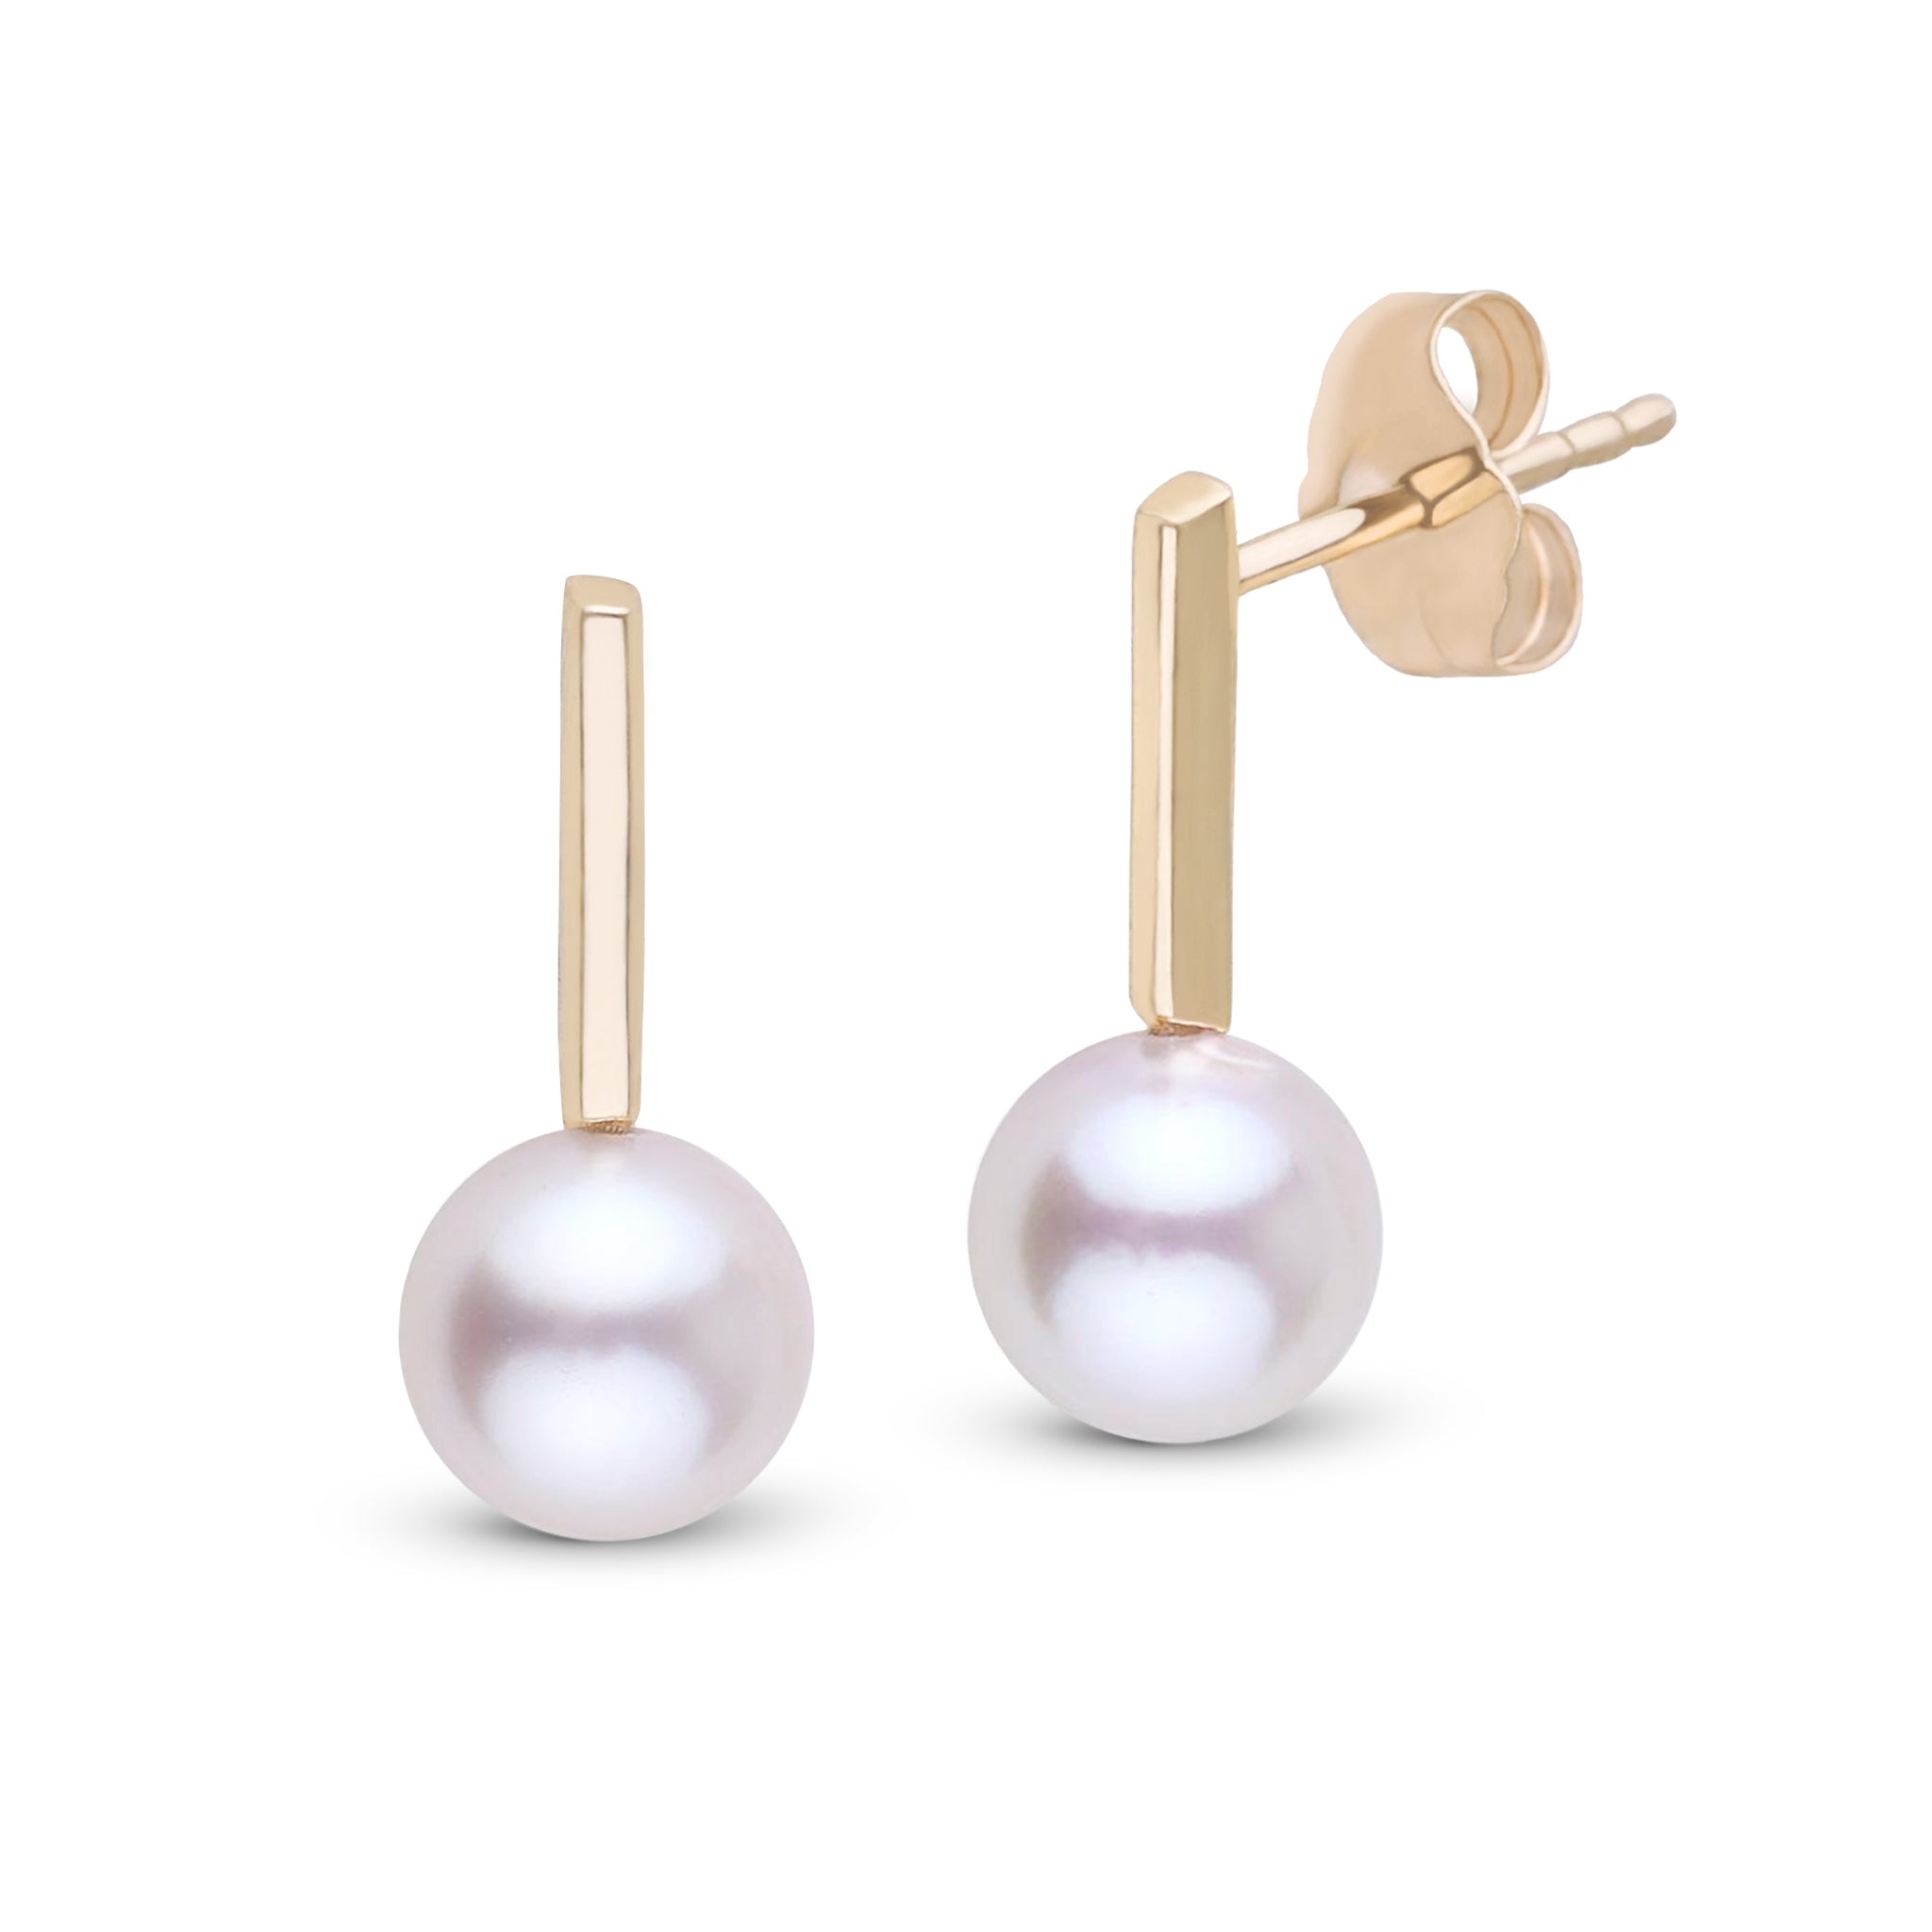 Petite Bar Collection 6.5-7.0 mm Akoya Pearl Earrings Yellow Gold